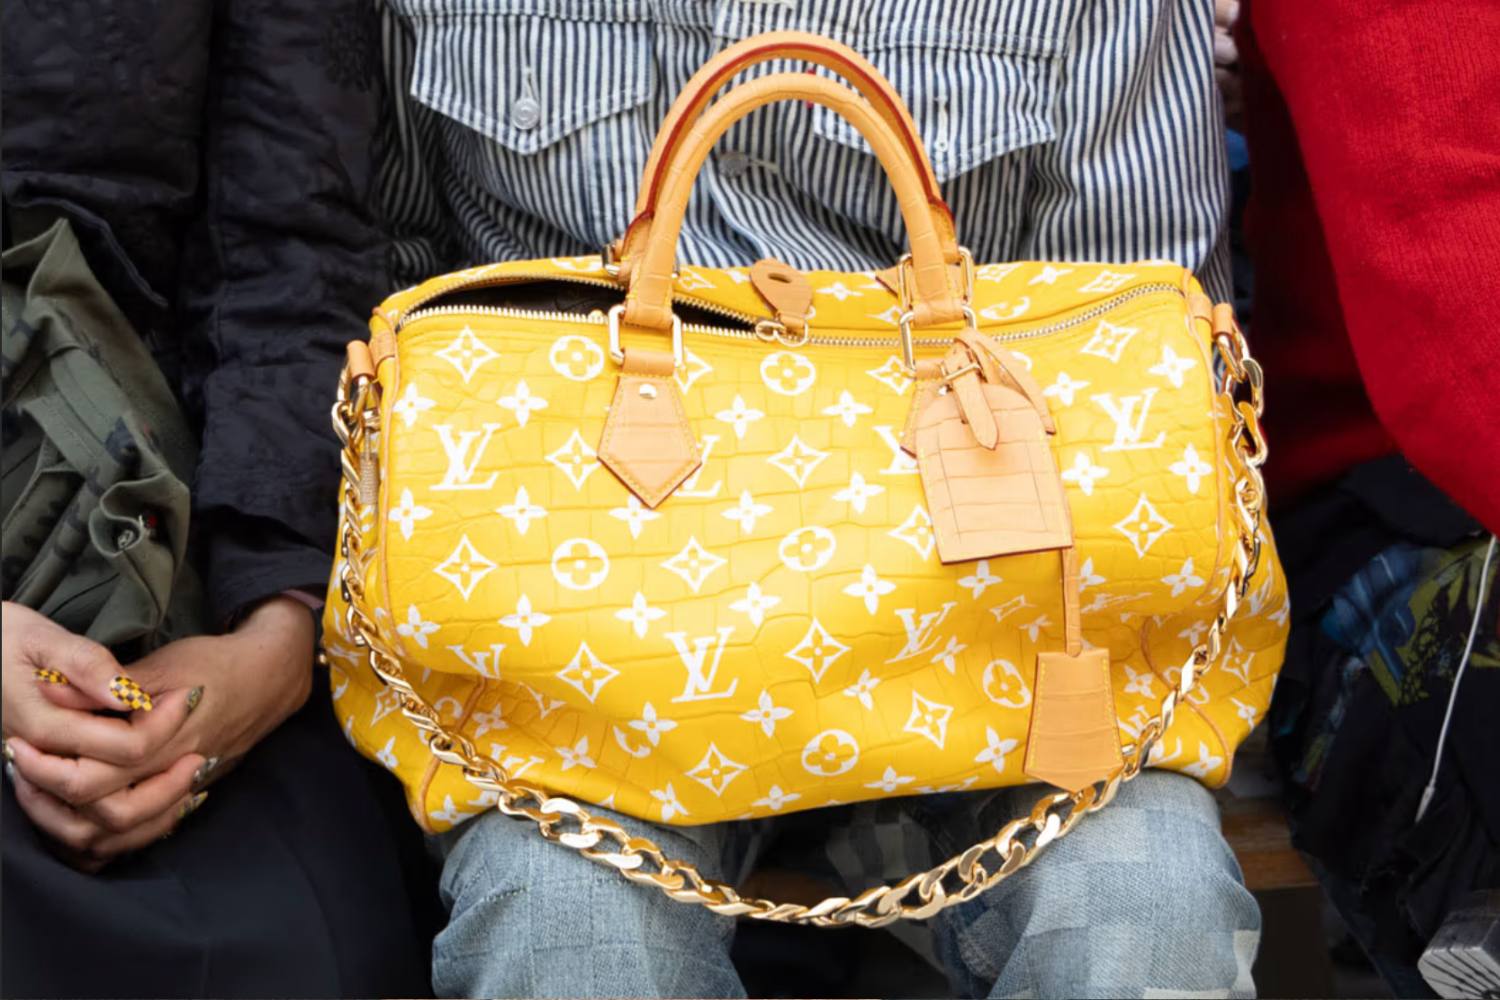 Yellow Louis Vuitton handbag with gold chain, on a lap